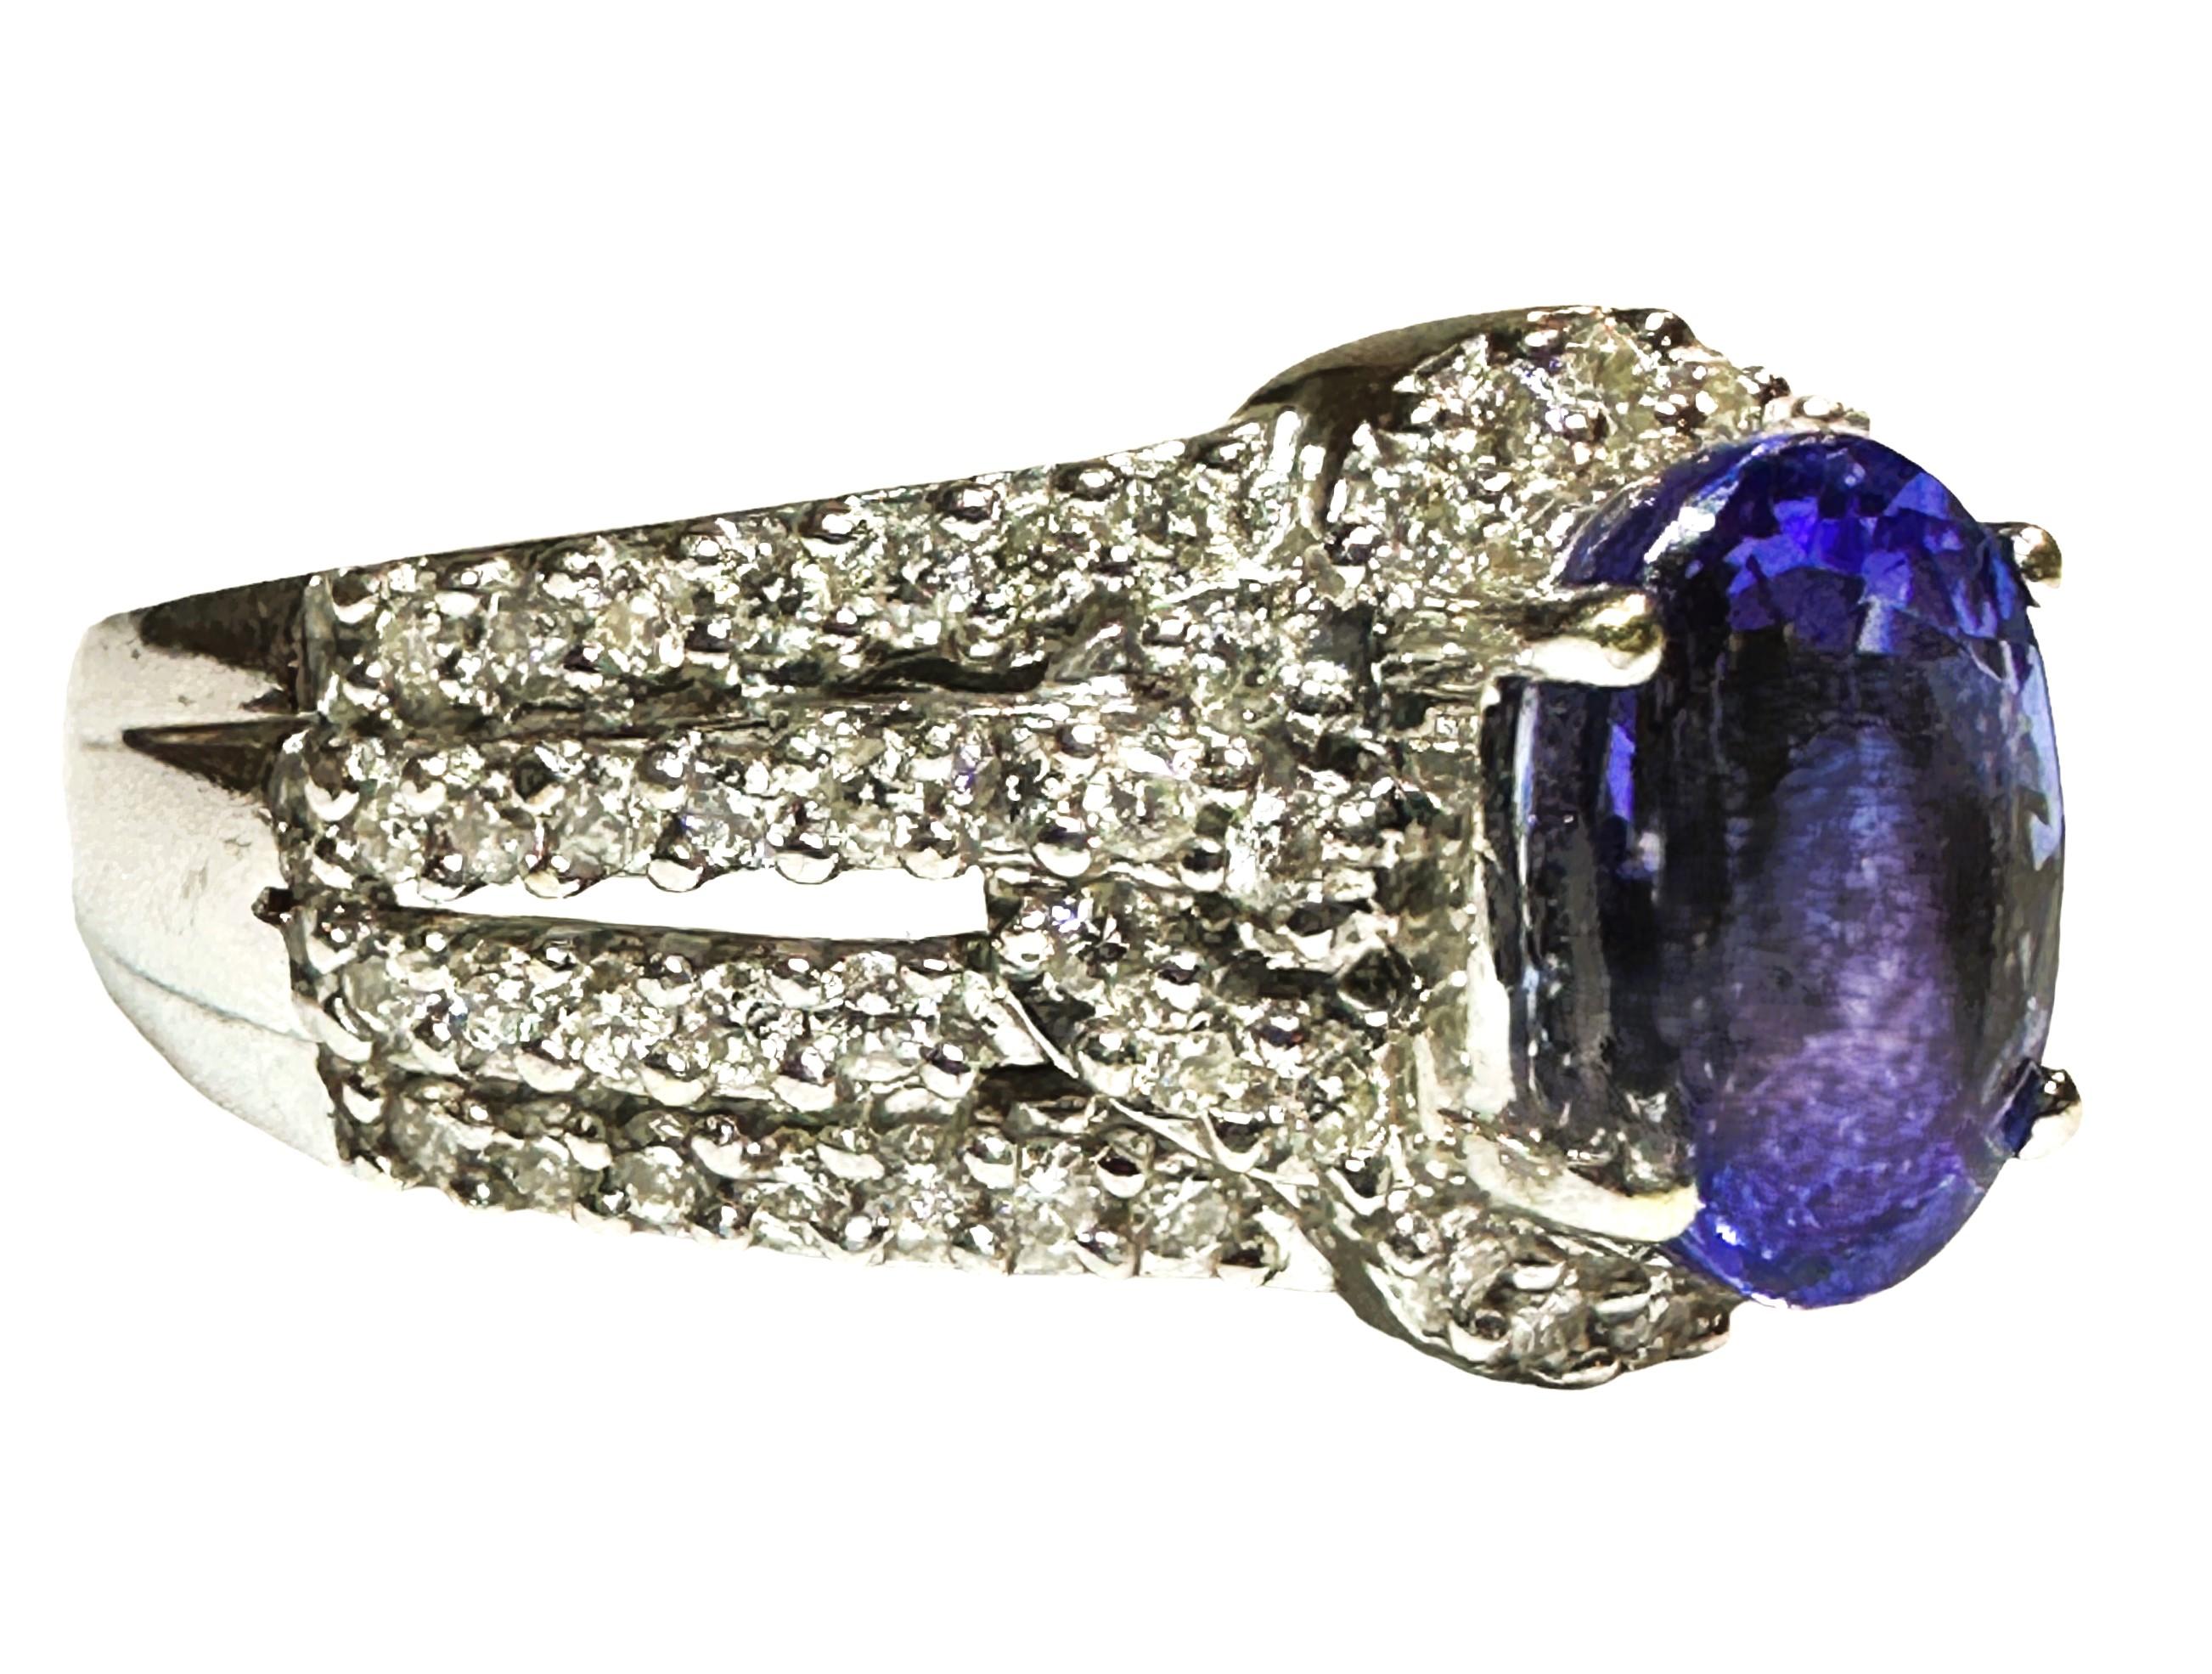 Women's 18K WG 1 Carat Oval Cut Tanzanite Ring with 3/4 CTTW Diamonds with Appraisal For Sale